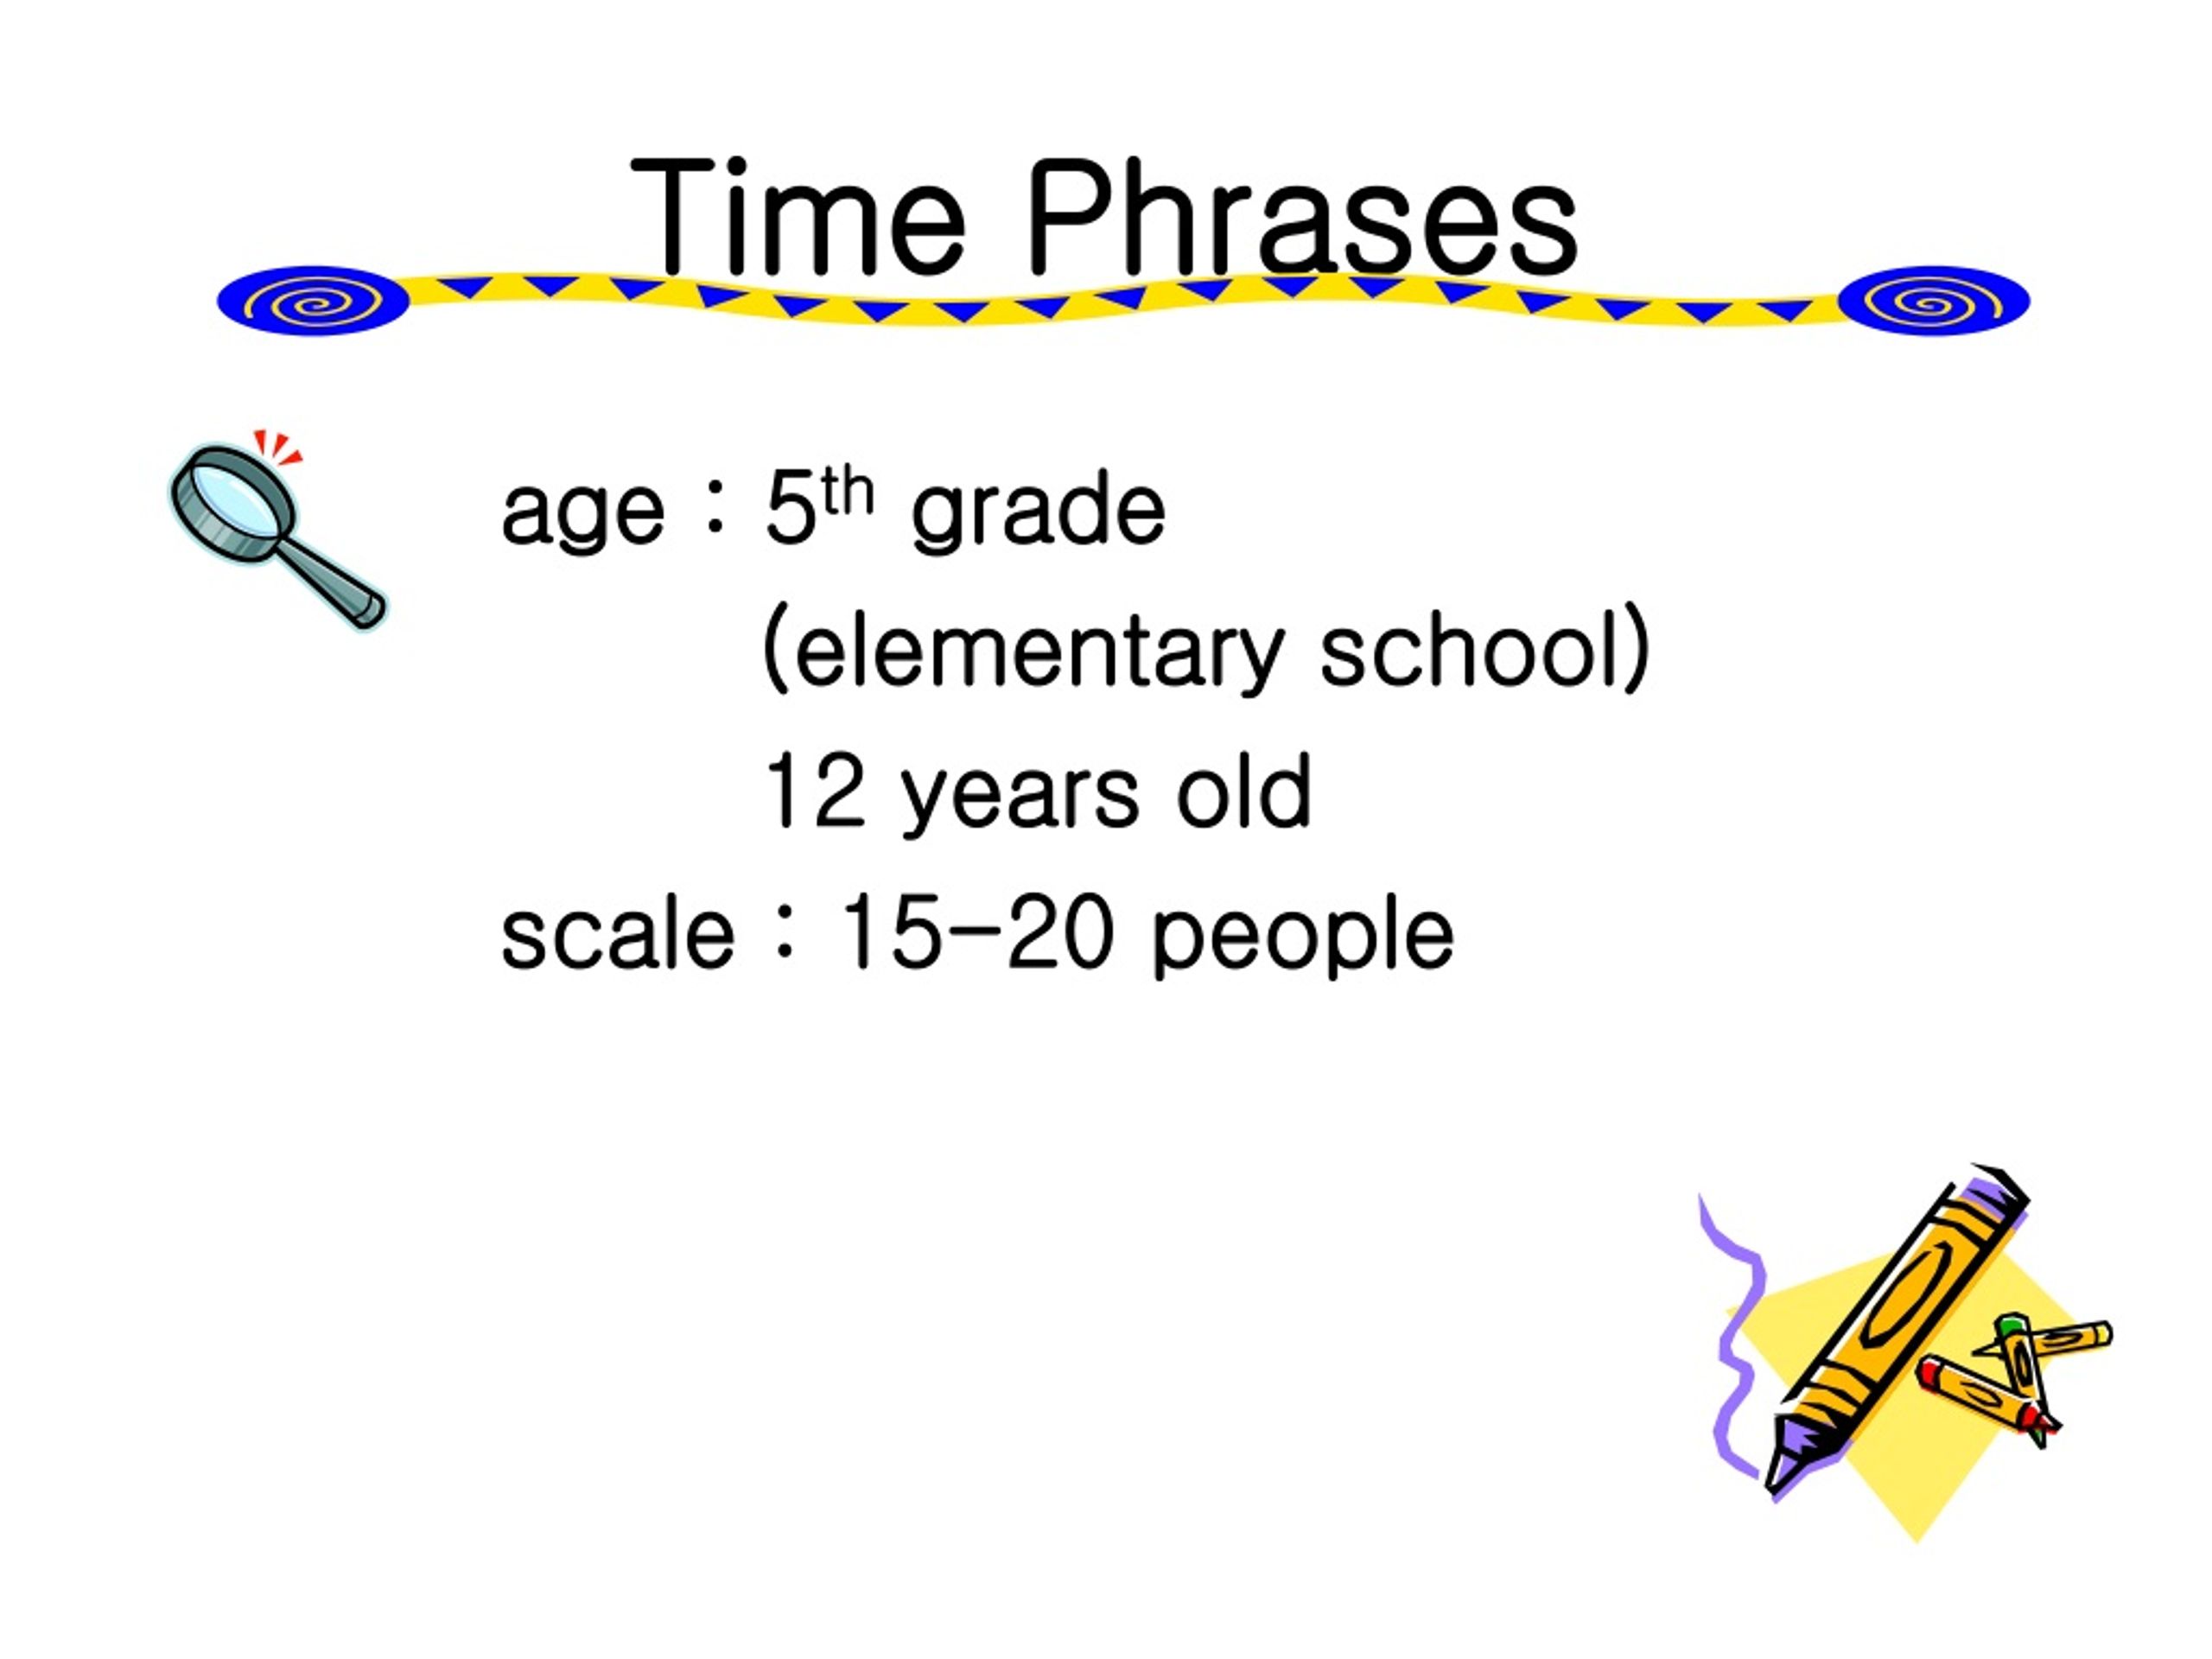 ppt-time-phrases-powerpoint-presentation-free-download-id-489432